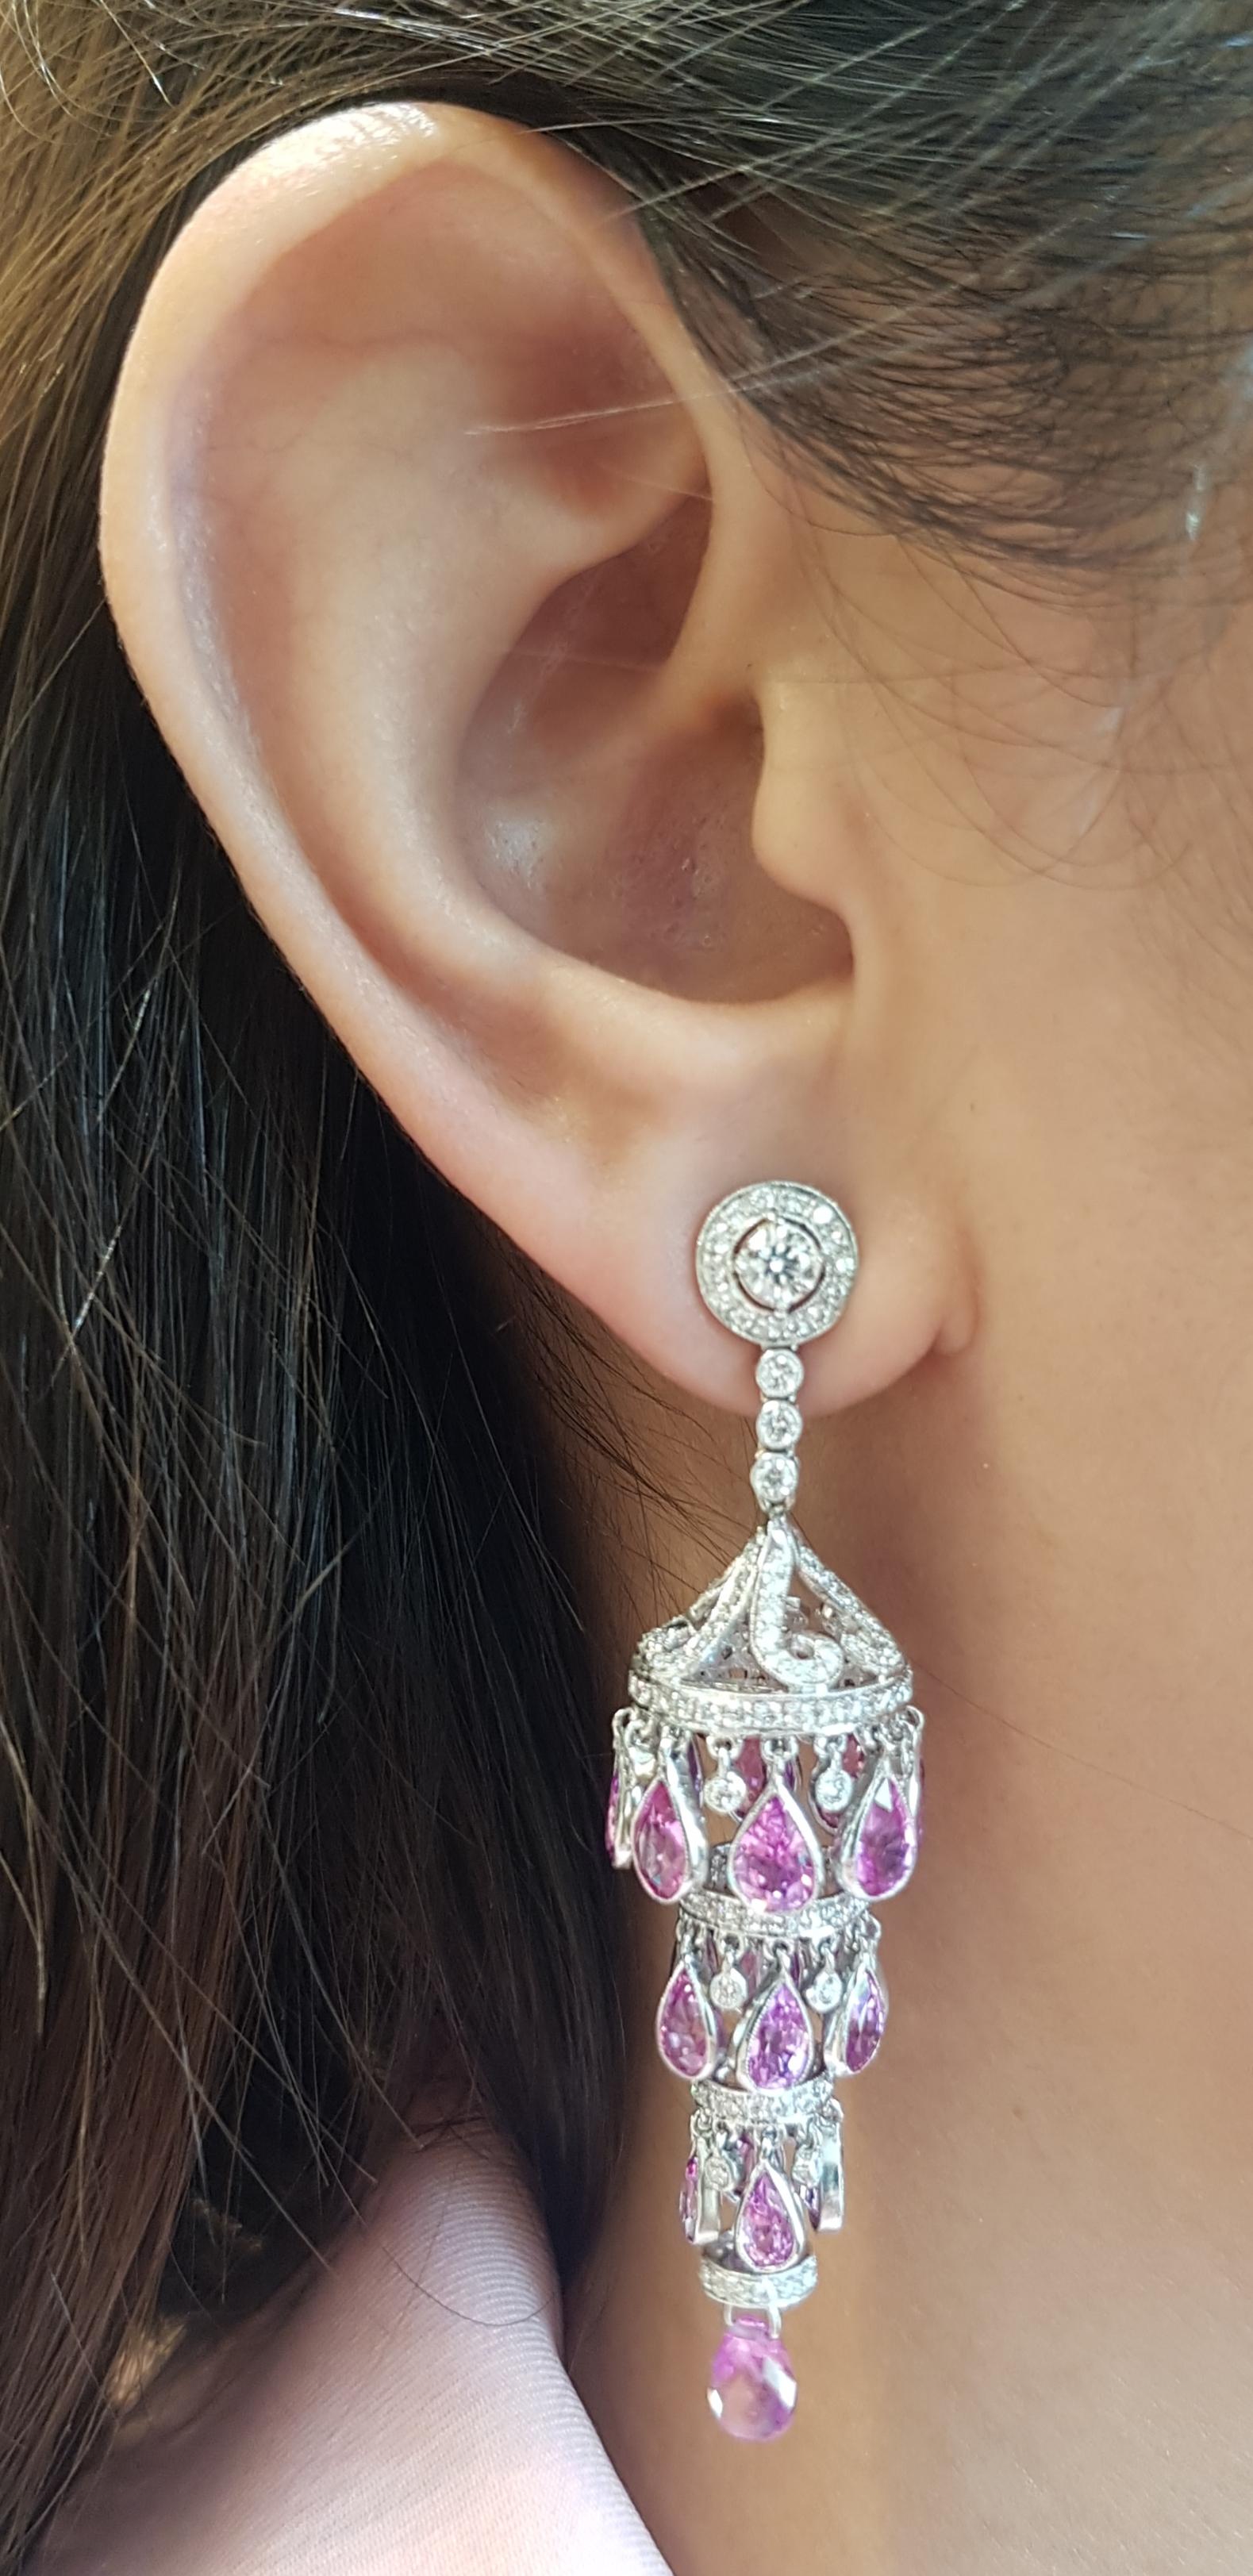 Pink Sapphire 13.35 carats with Diamond 2.69 carats Earrings set in 18 Karat White Gold Settings

Width:  1.5 cm 
Length: 6.0 cm
Total Weight: 20.74 grams

